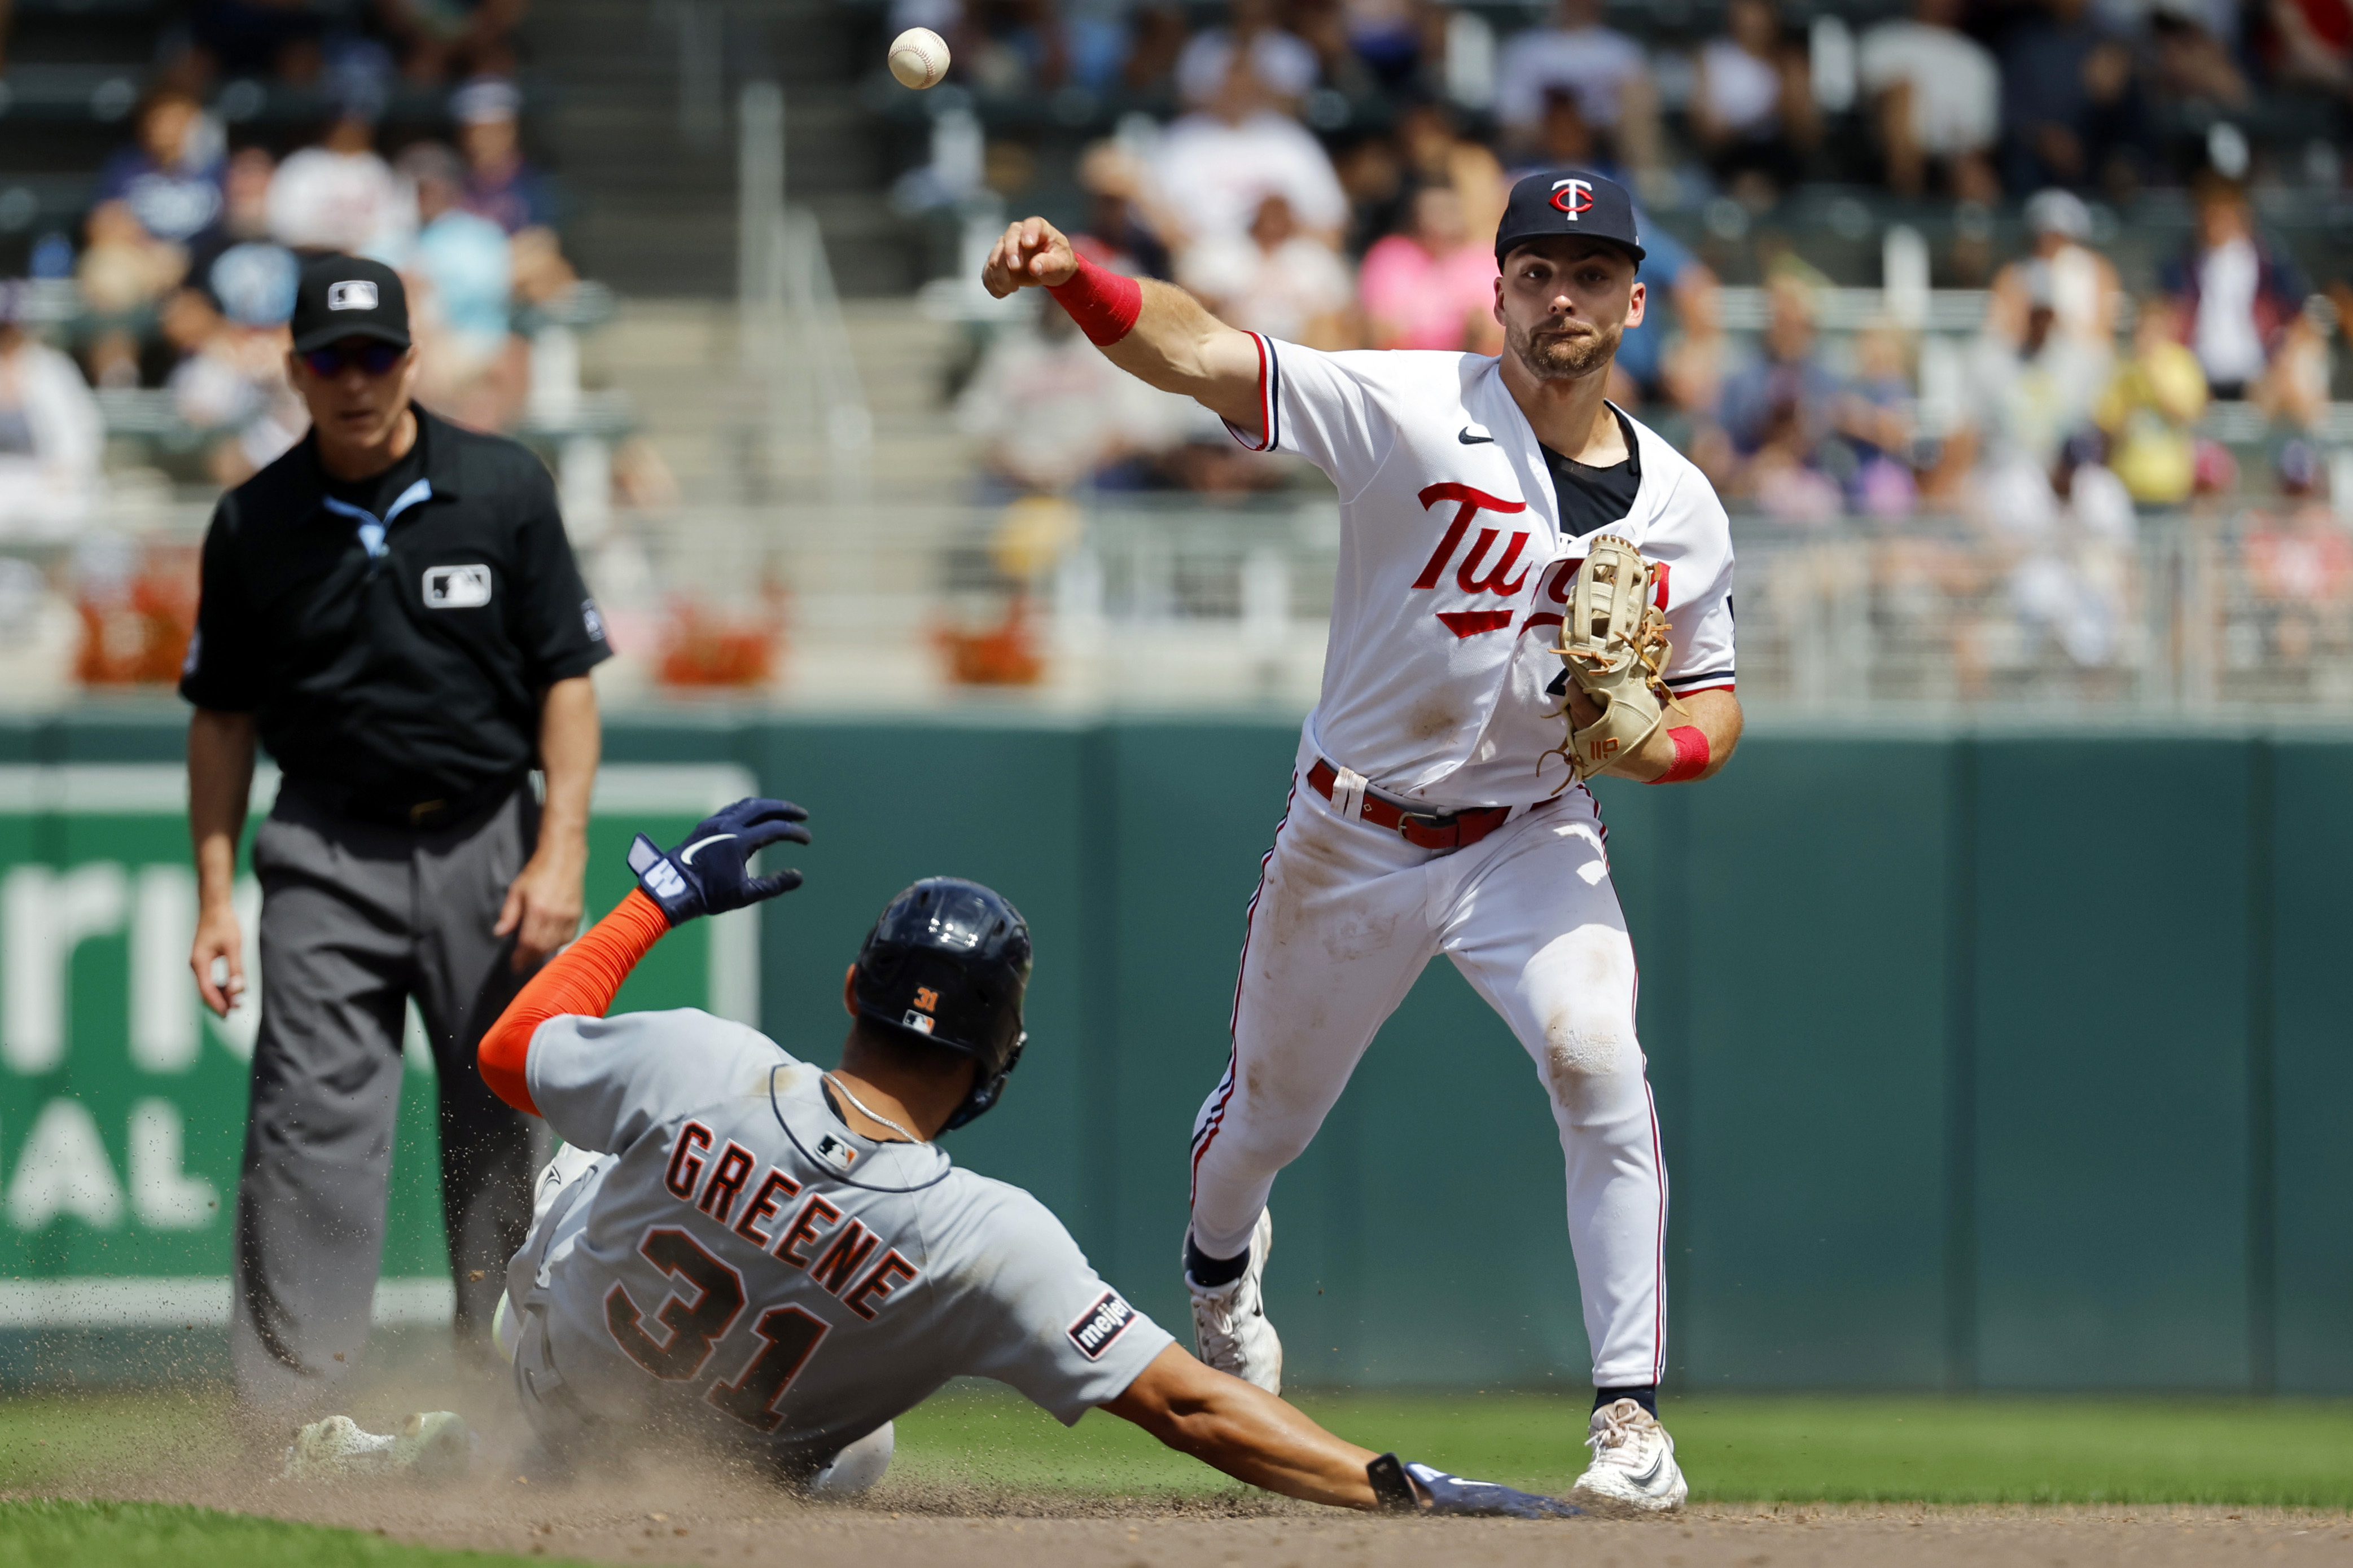 Torkelson homers twice against the Twins again, leading the Tigers to an  8-7 victory